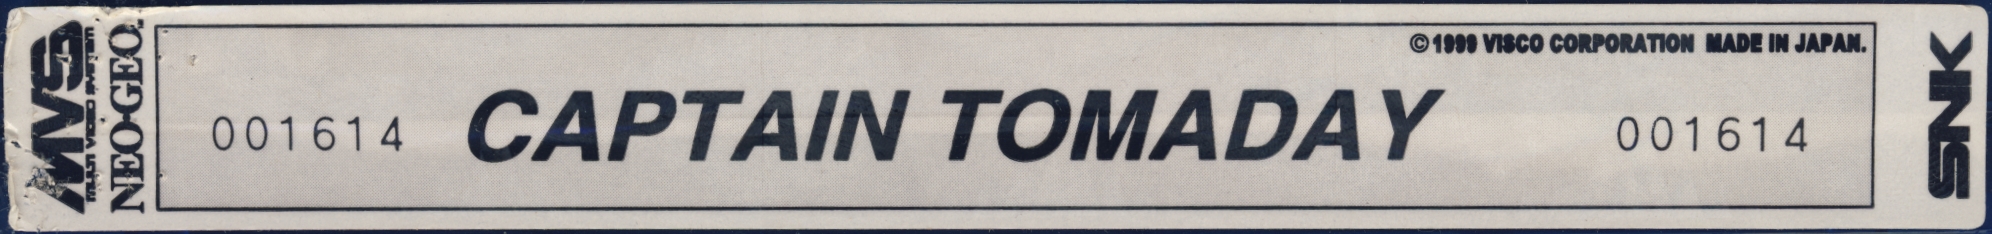 Captain tomaday us label.jpg